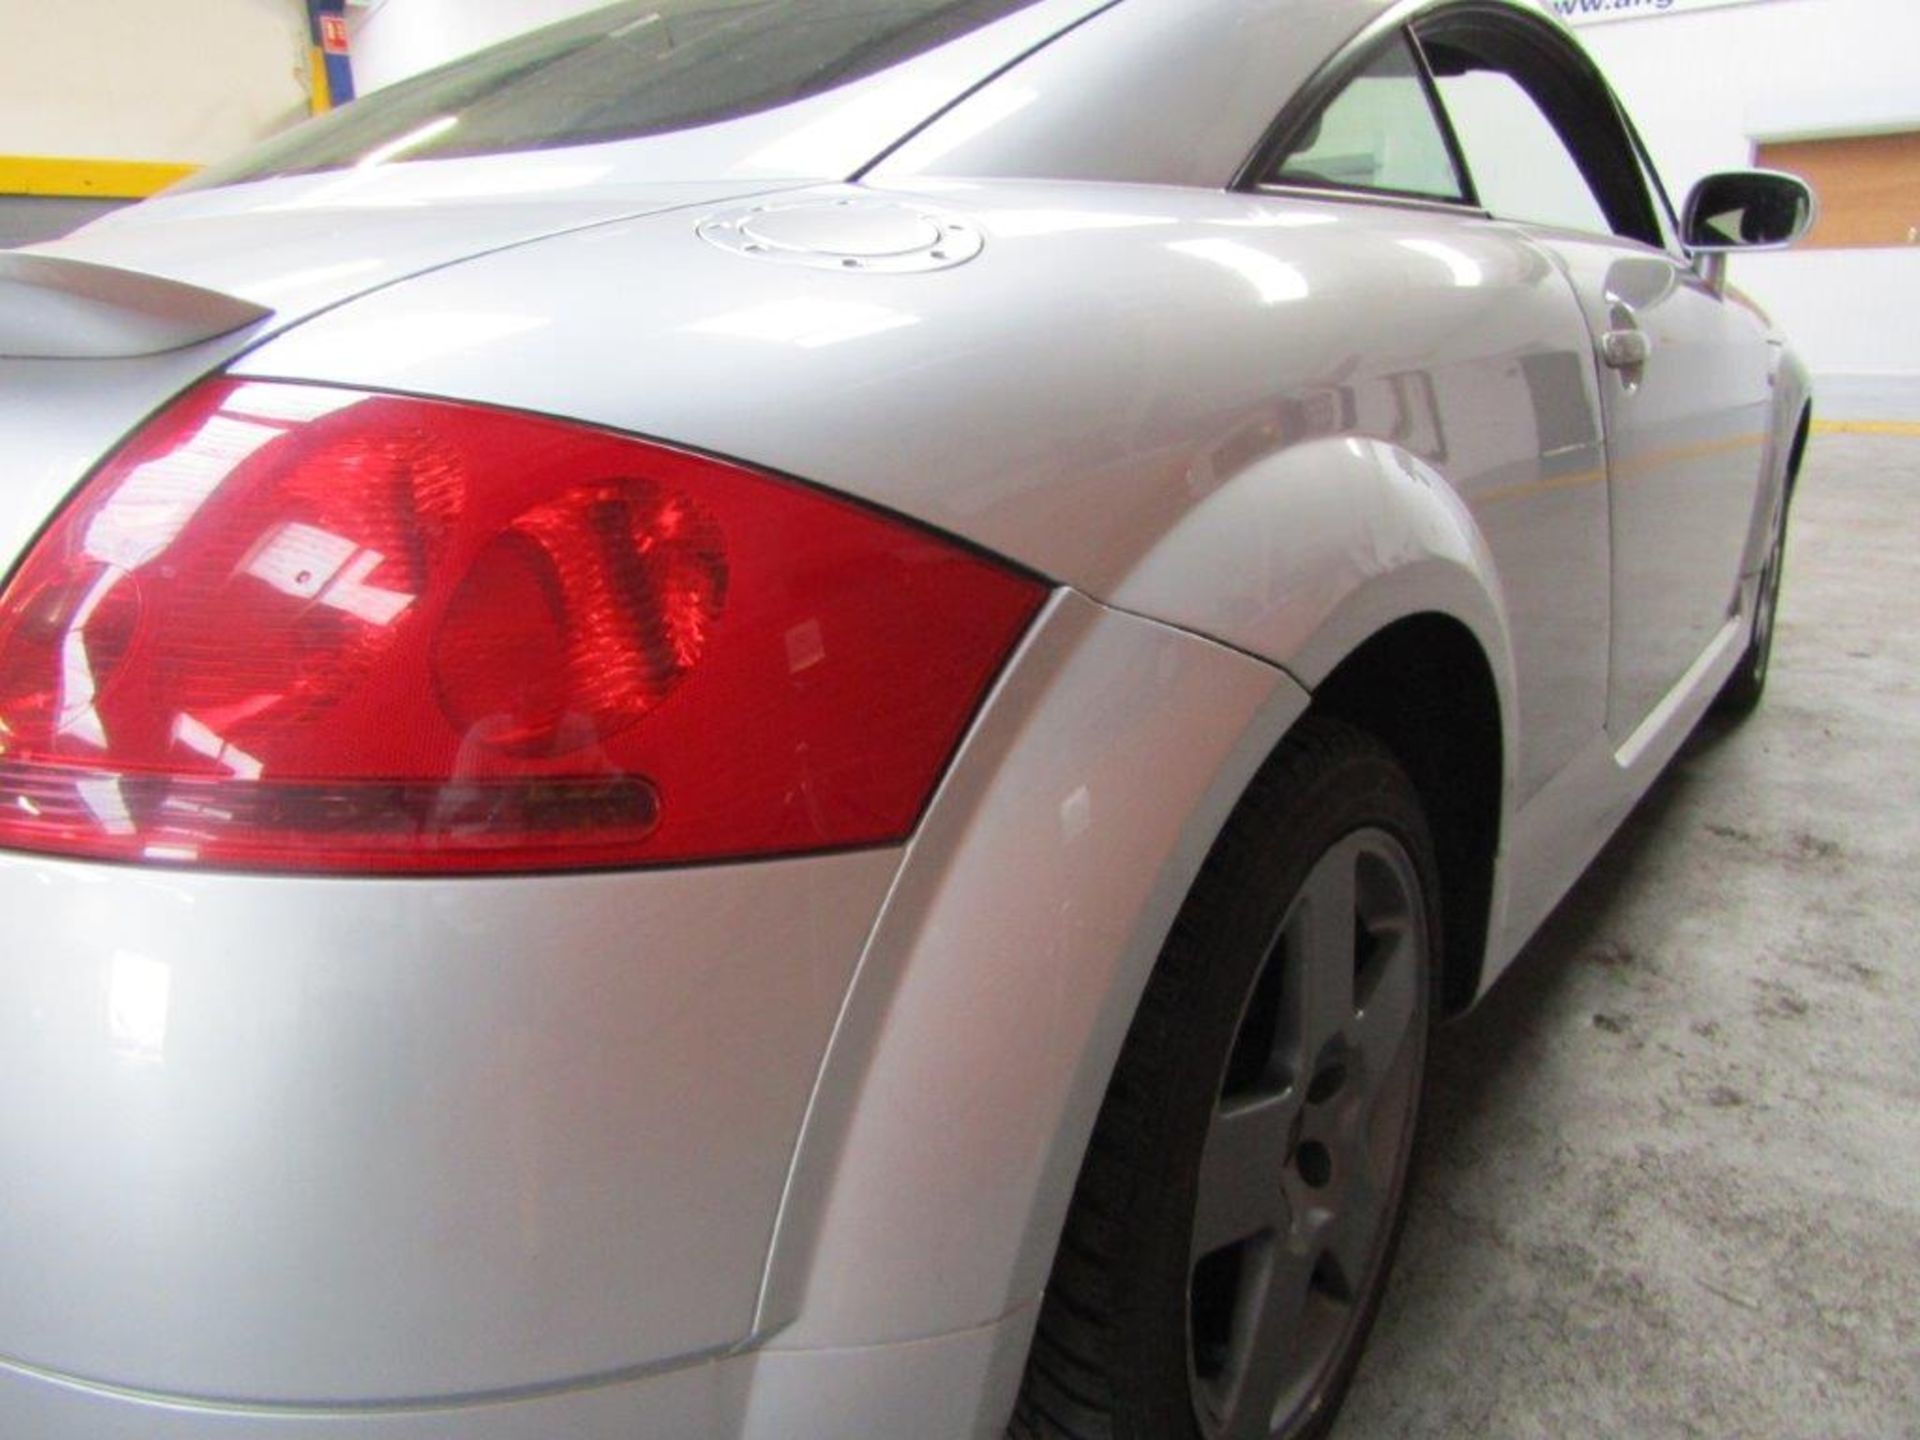 05 05 Audi TT Coupe - Image 4 of 16